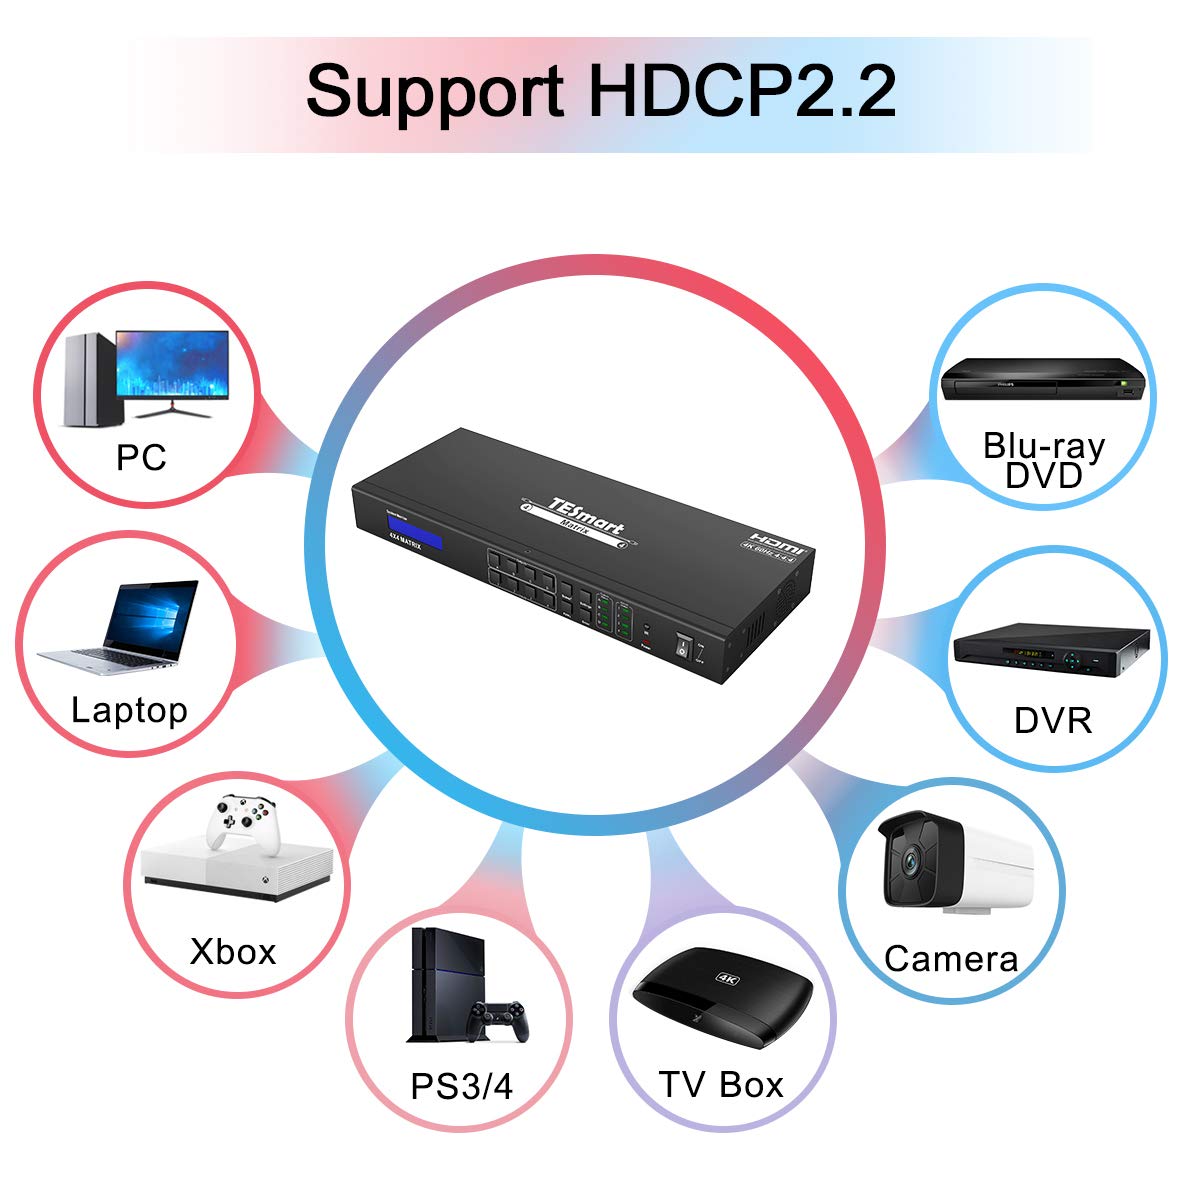 TESmart Ultra HD 4K HDMI 4X4 Matrix Switcher 4 Port Input and 4 Port Output with RS232 IR Remote Control Supports 4Kx2K@60HZ, HDCP, 3D & Deep Color